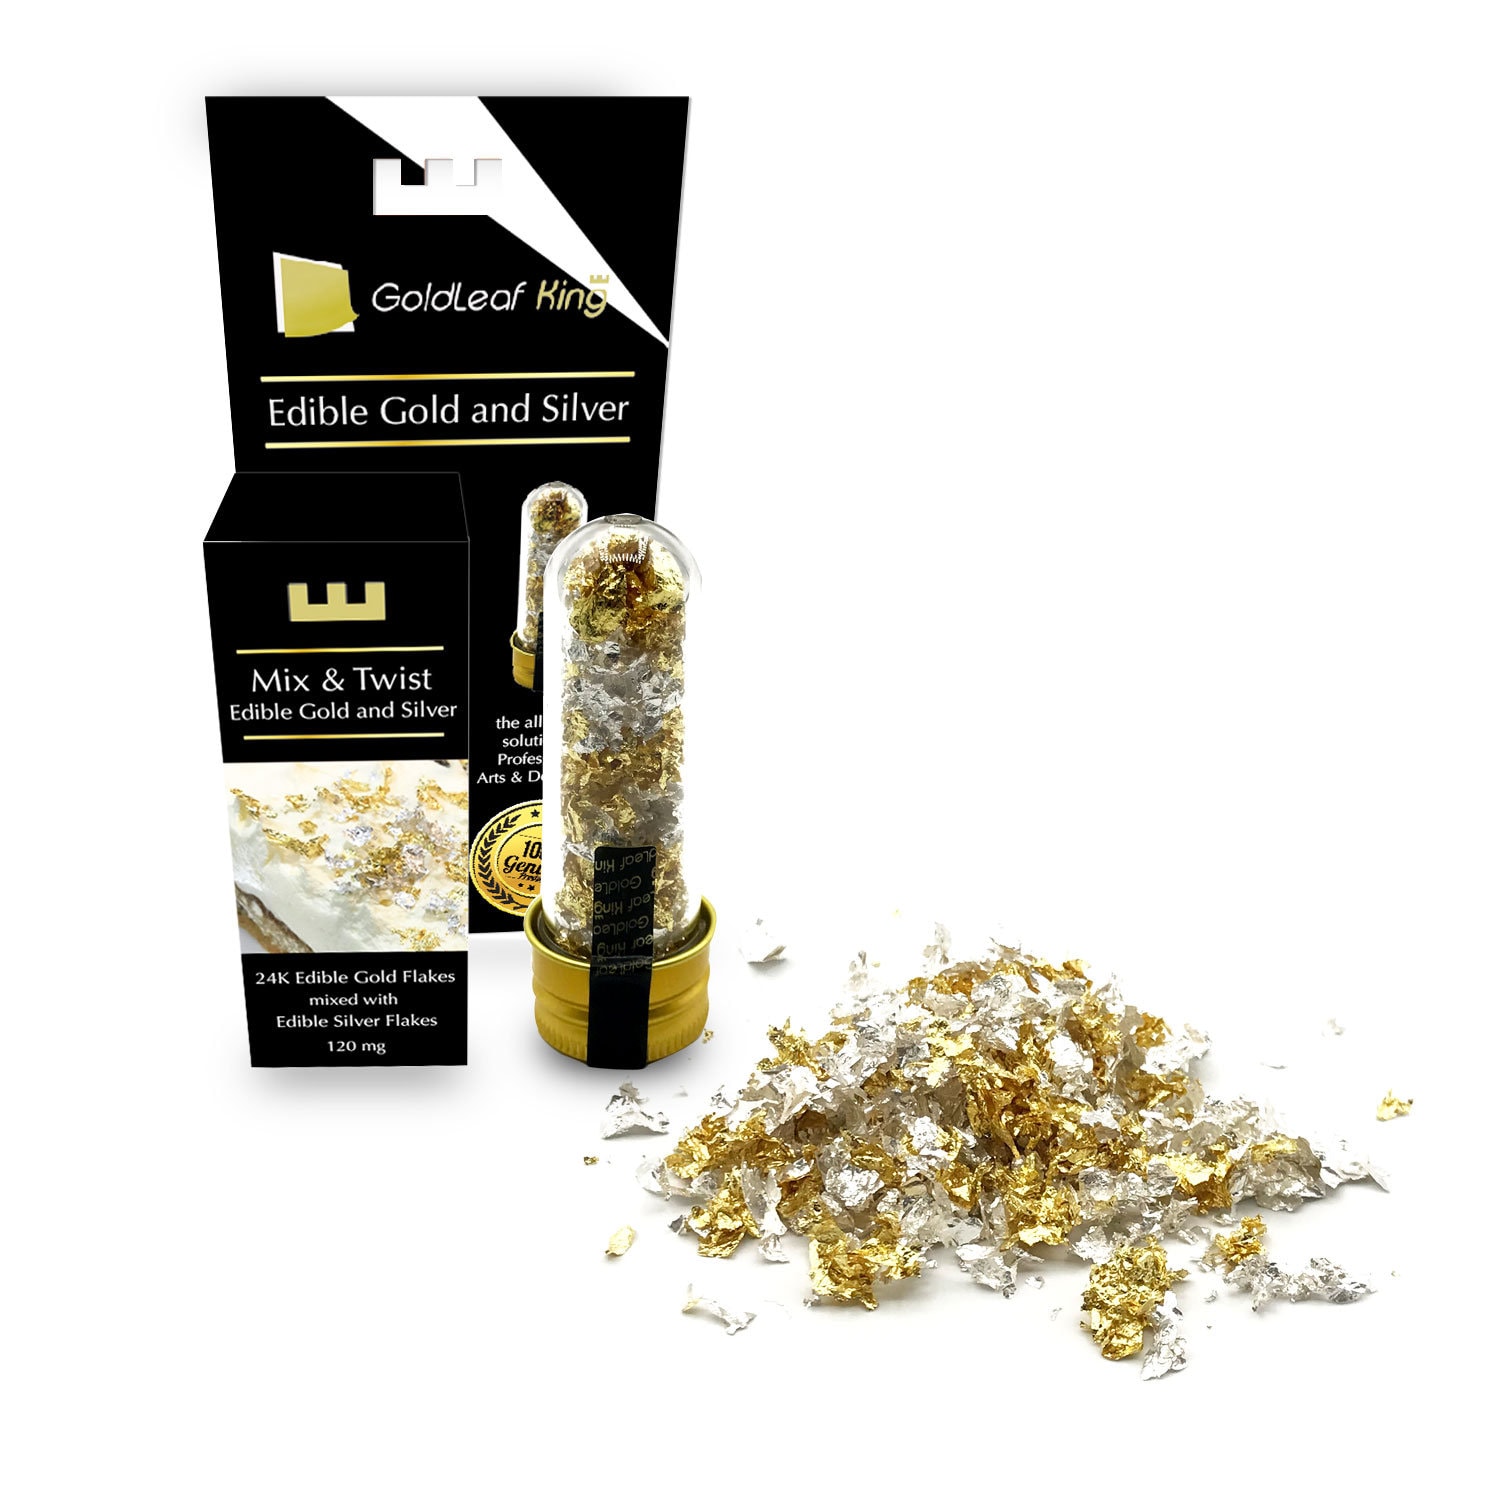 Large 24k edible gold flakes - Buy at Gold Leaf NZ - Free Shipping